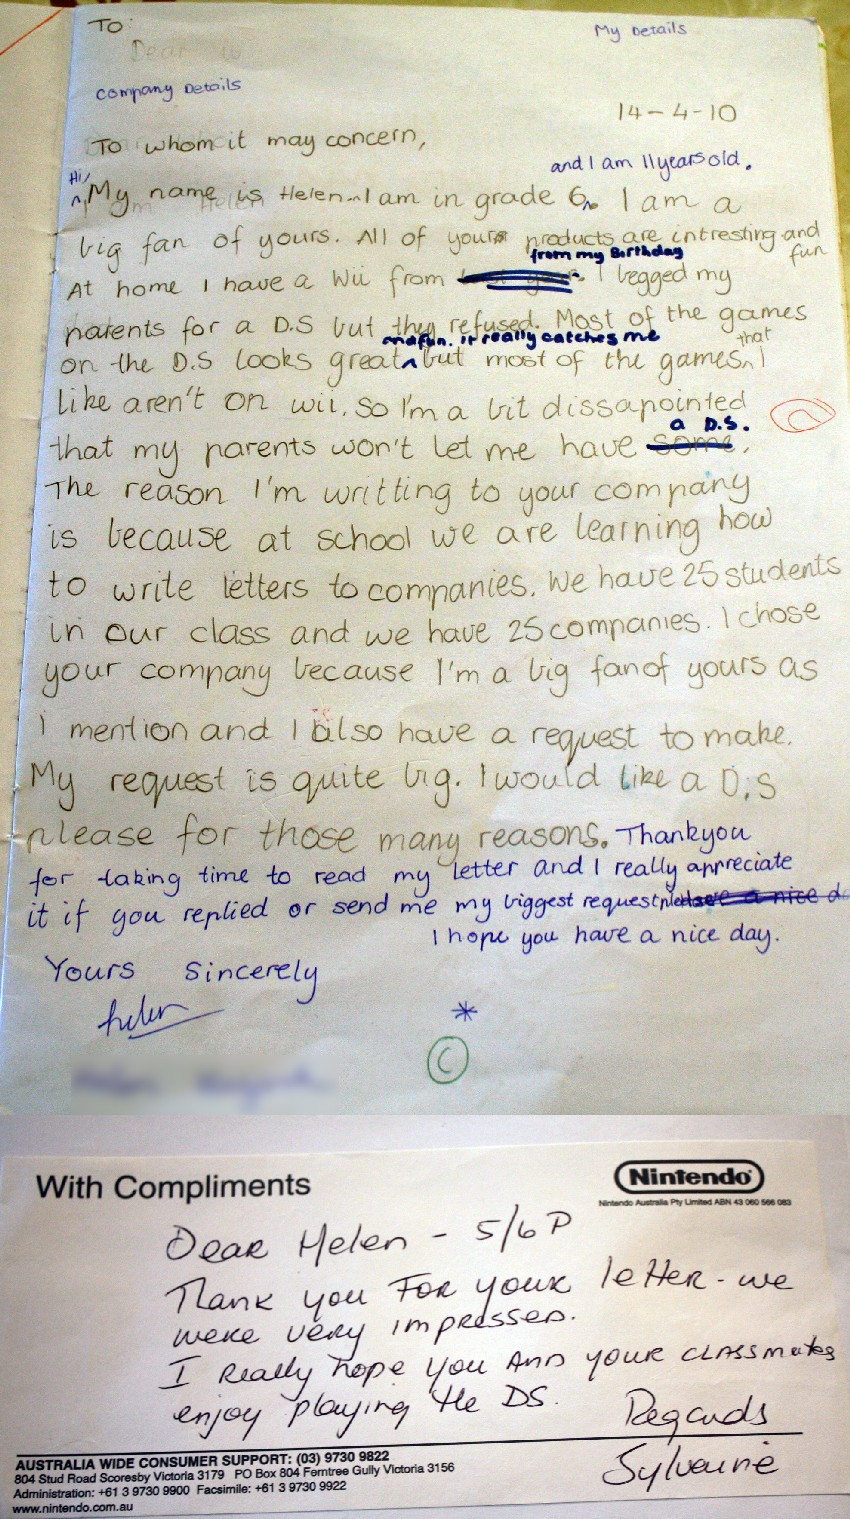 A 6th grader wrote a letter to Nintendo, the response she got was awesome.